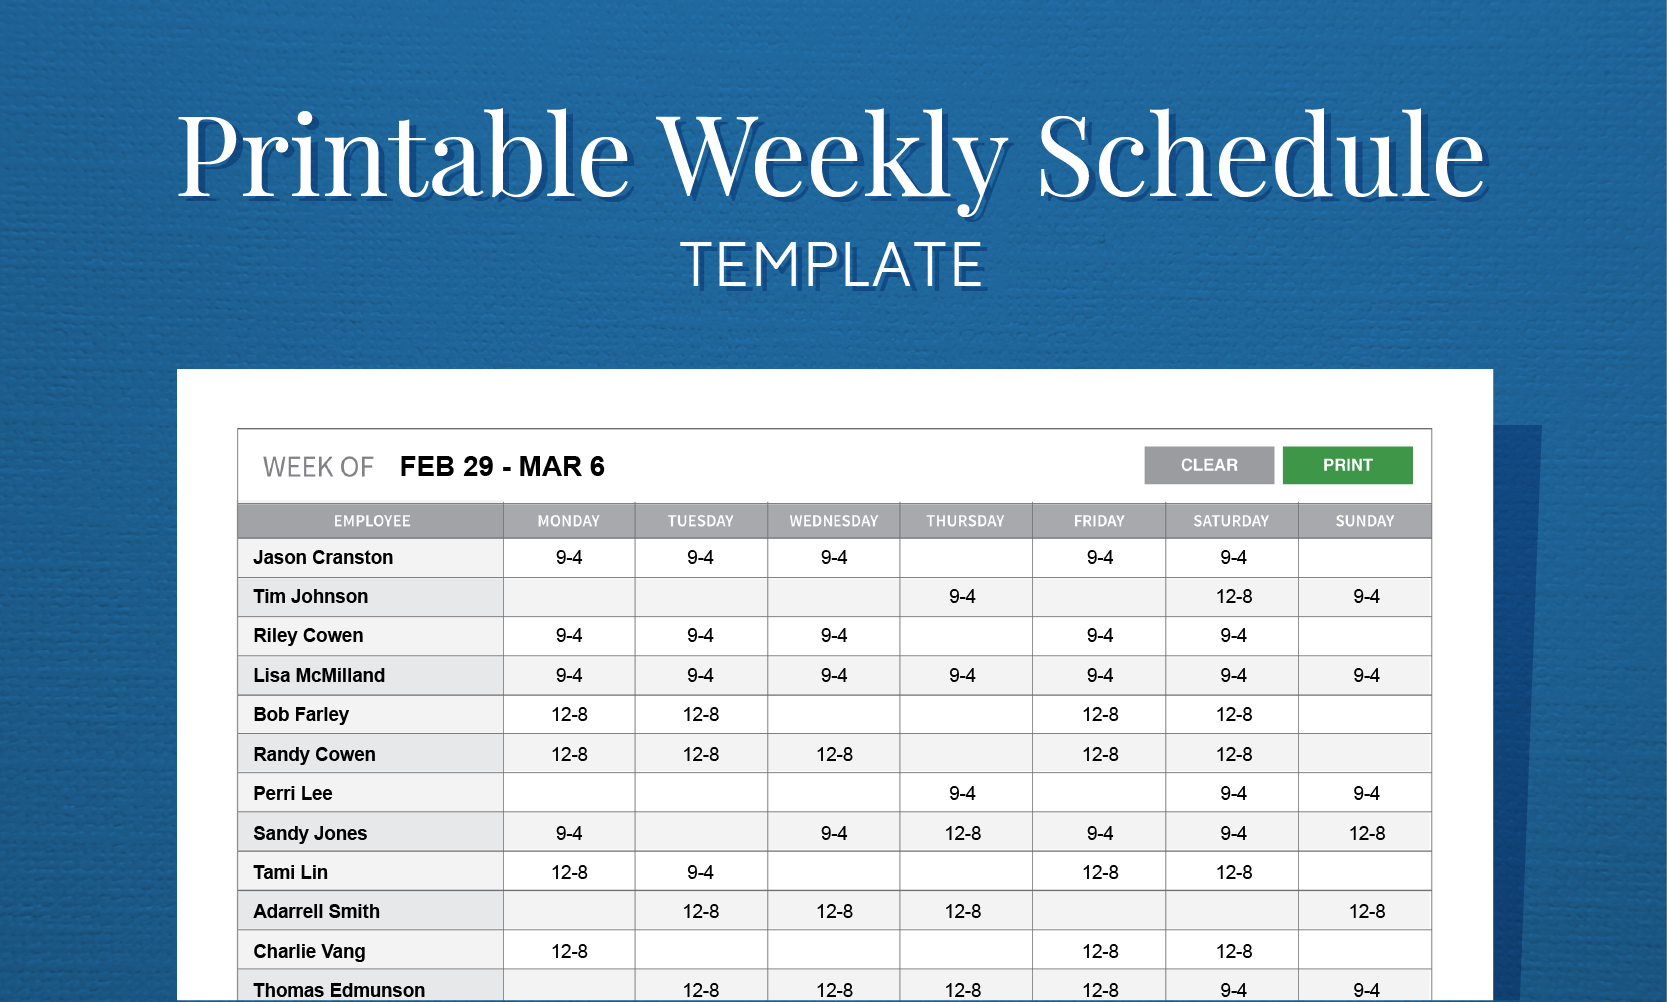 Free Printable Weekly Work Schedule Template For Employee Scheduling